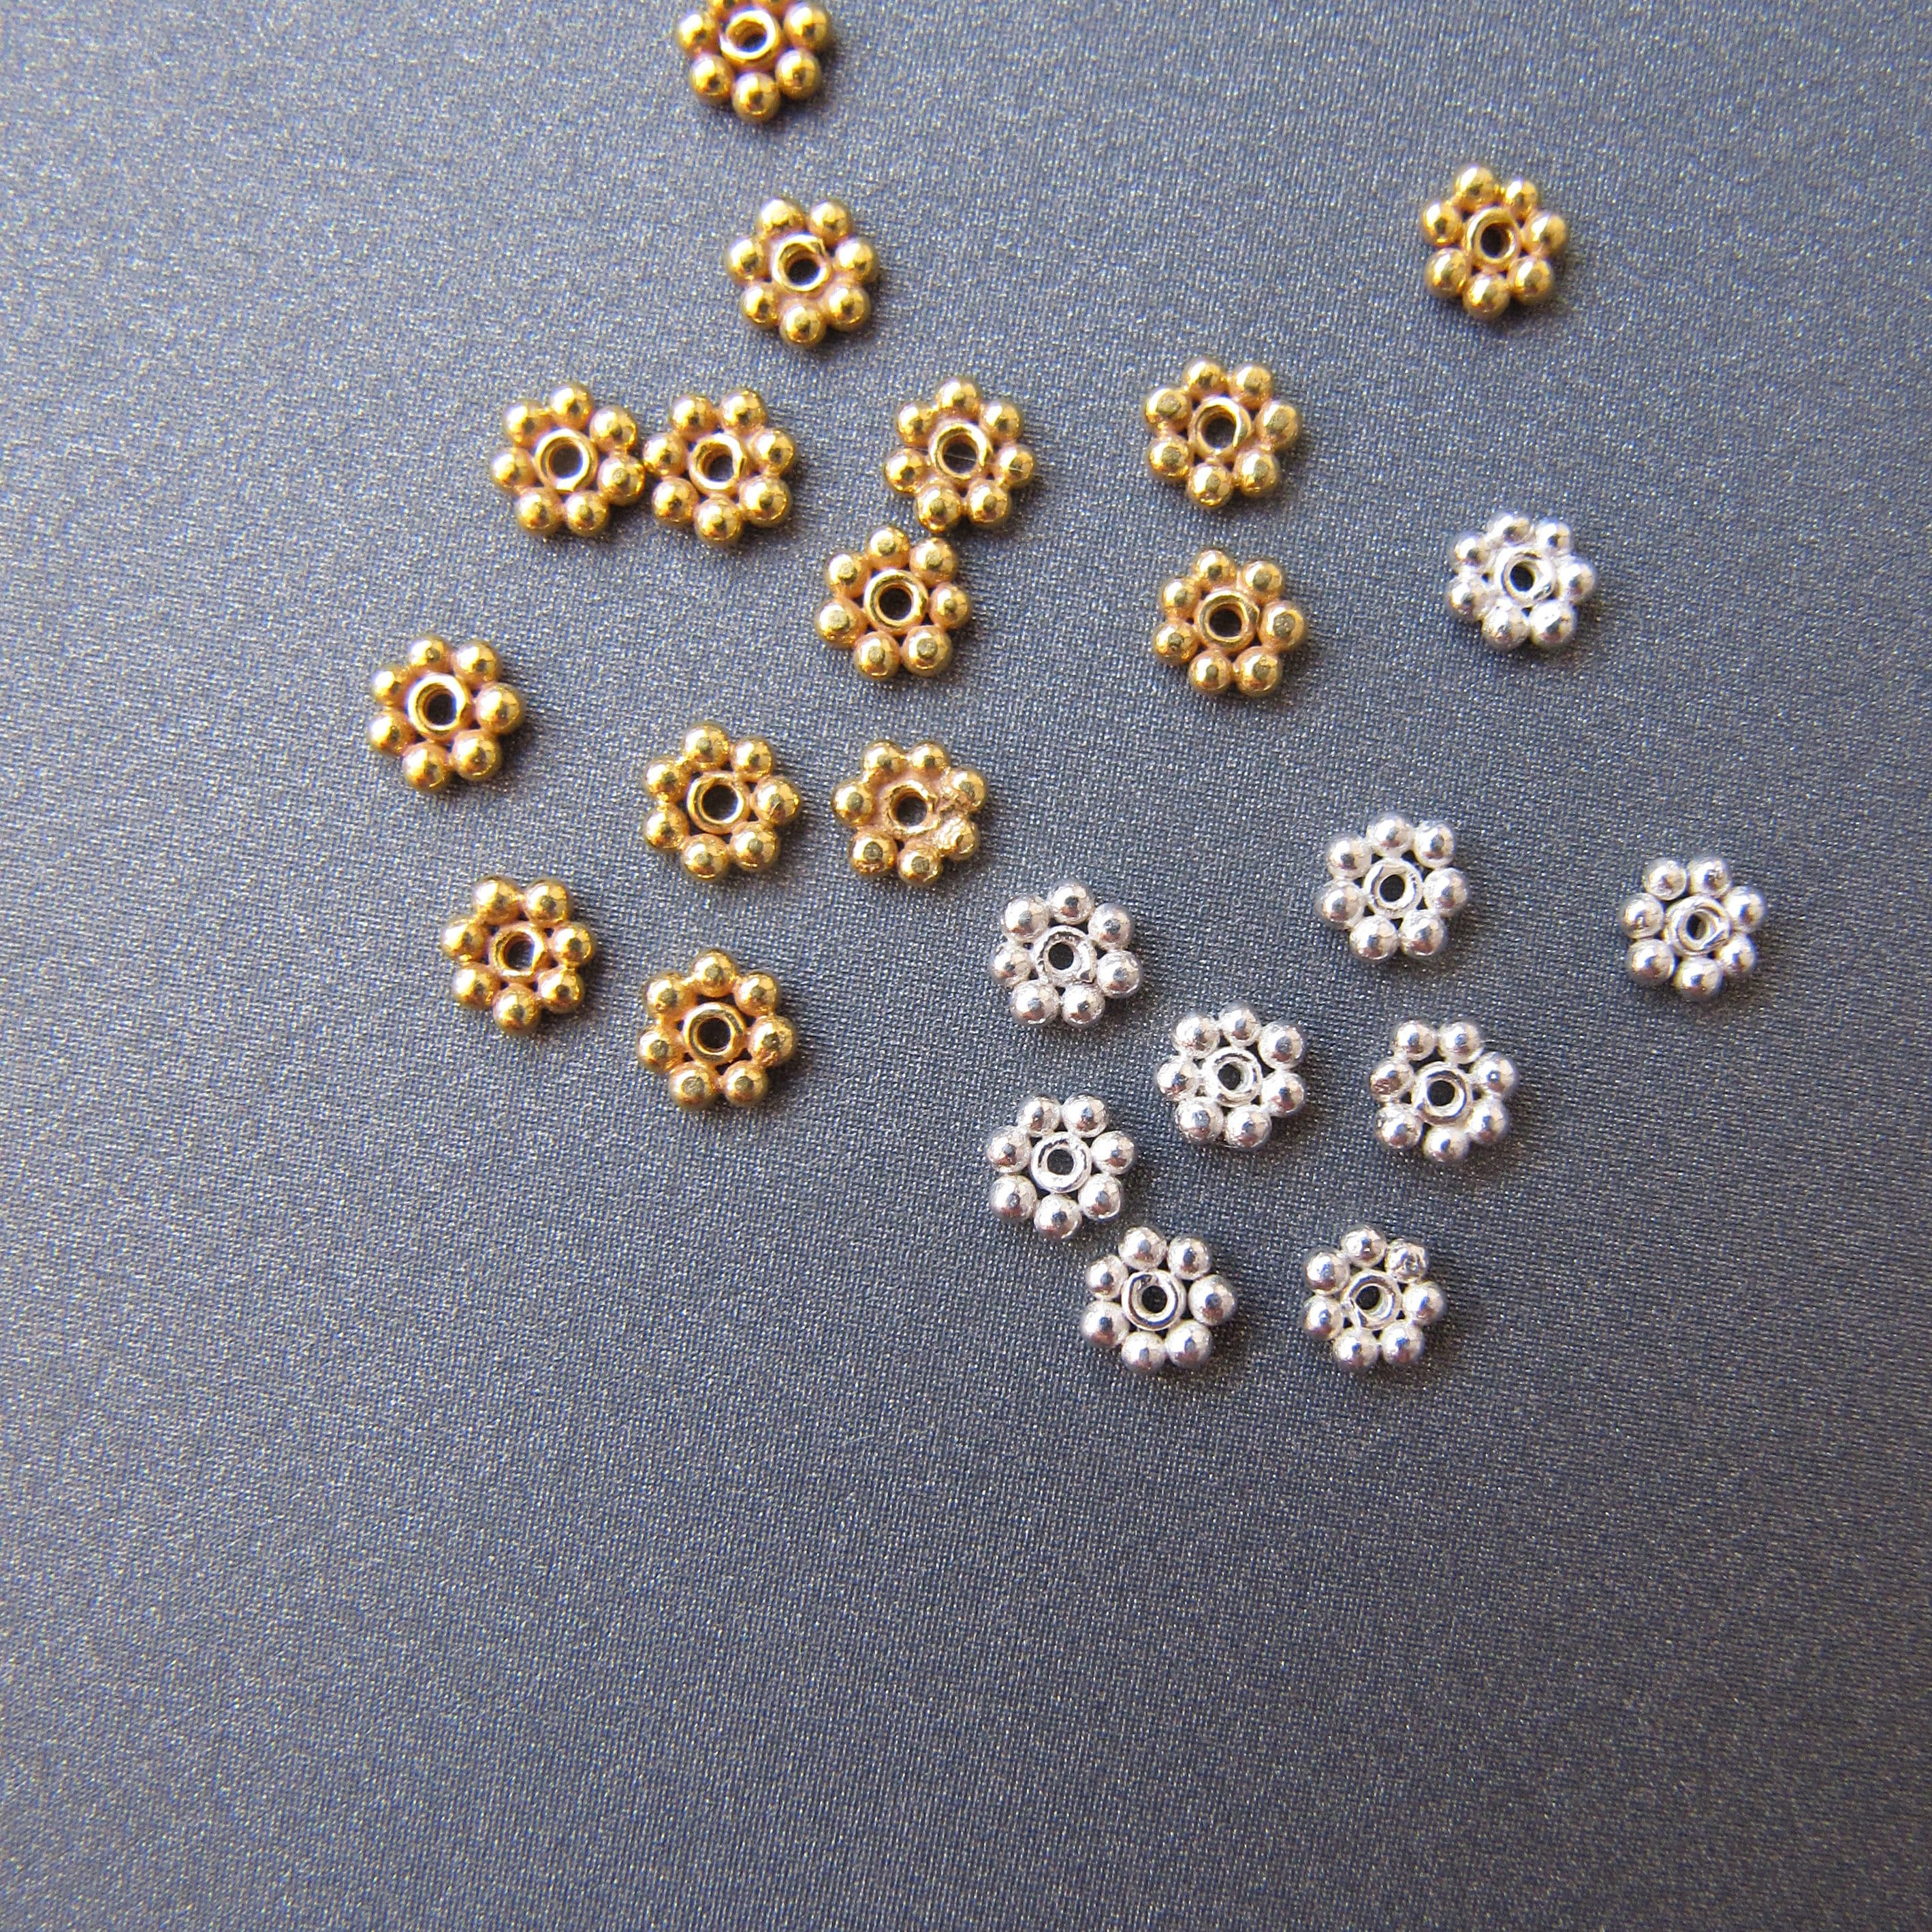 Small Golden Bead Caps, Caps for Jewelry Making, 8mm Bead Caps, End Caps  for Beads, Bali Style Granulated Bead Caps, 10 Pieces FD-30 